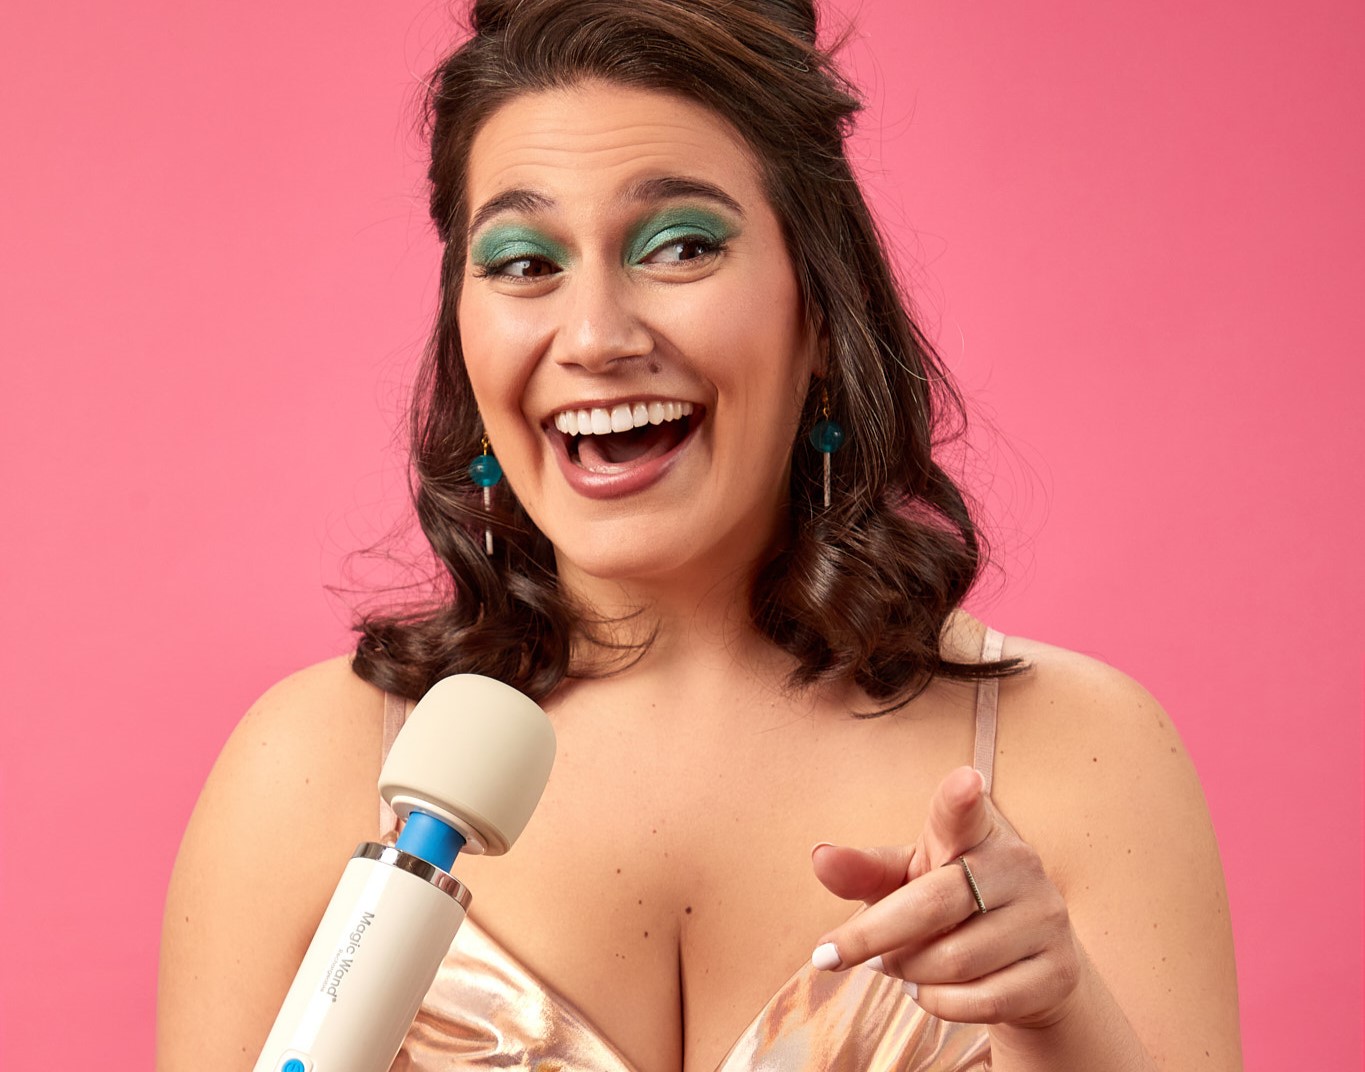 Danielle posing with a Magic Wand vibrator as a microphone.